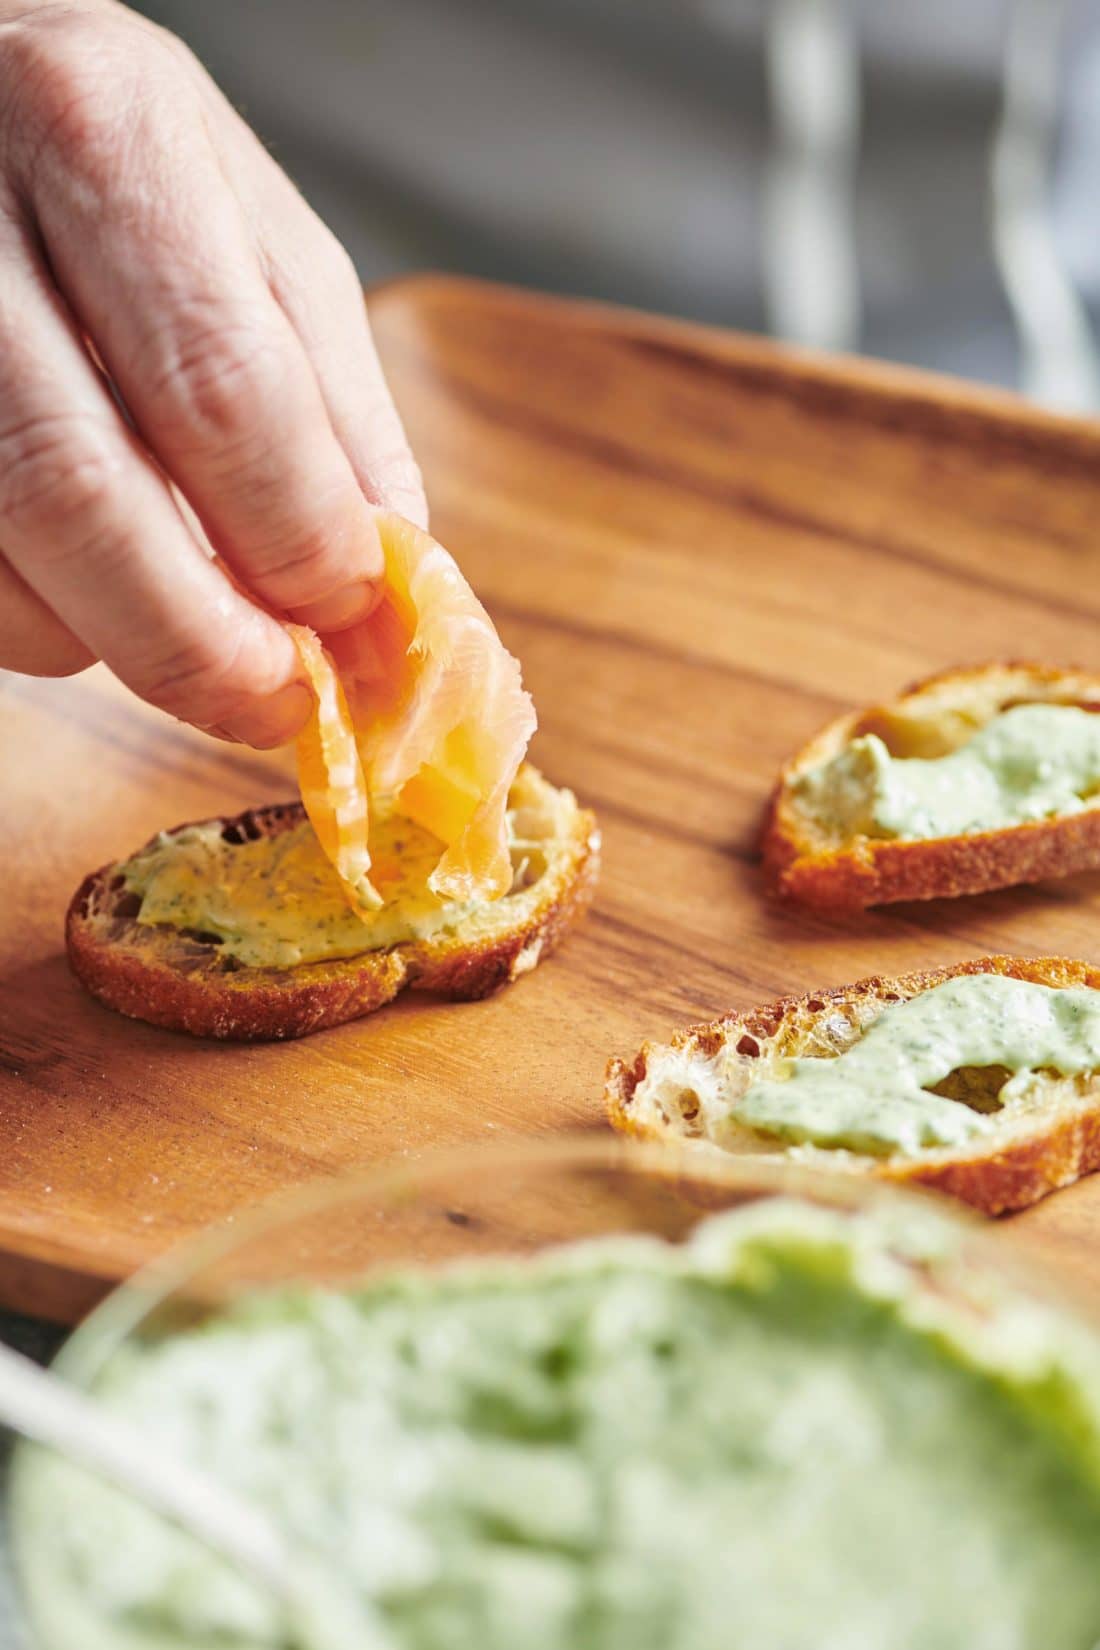 Woman placing Smoked Salmon onto a Crostini with Herbed Mayonnaise.